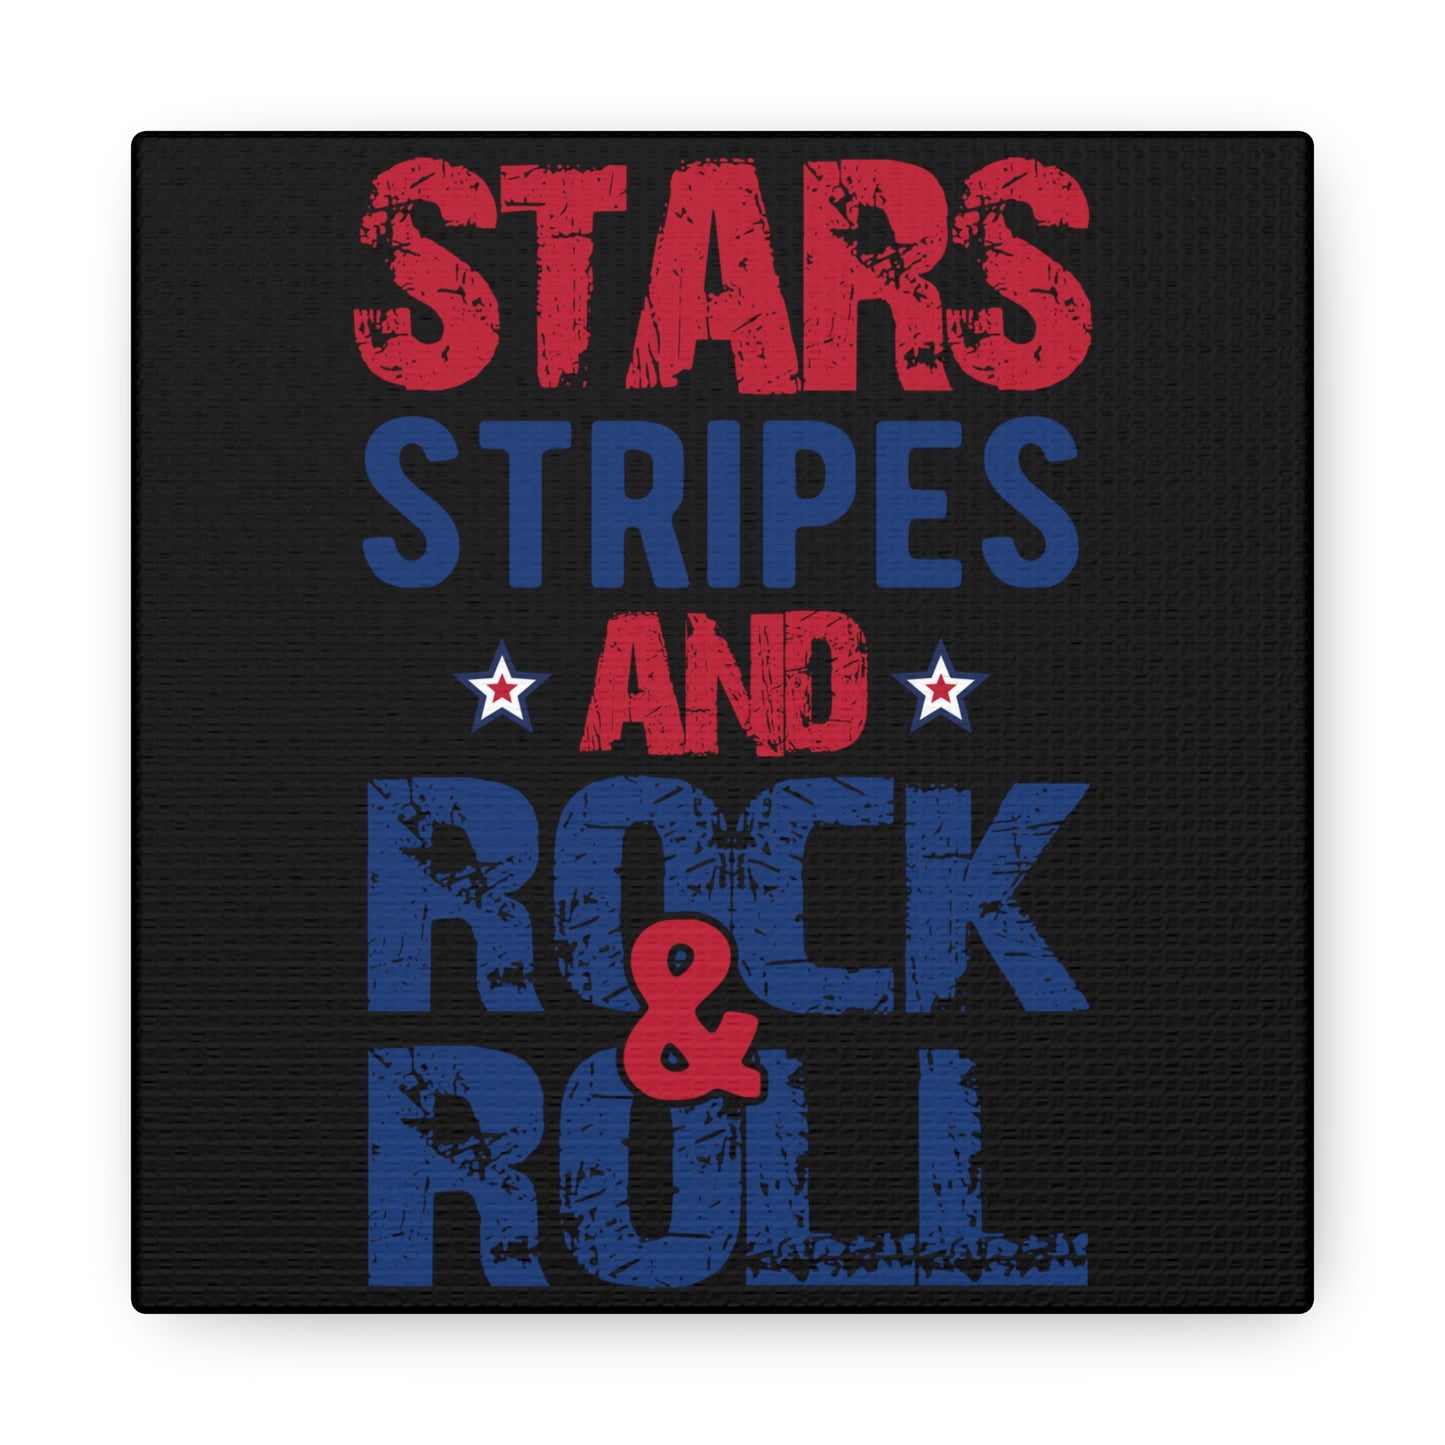 "Stars, Stripes And Rock & Roll" T-Shirt - Weave Got Gifts - Unique Gifts You Won’t Find Anywhere Else!